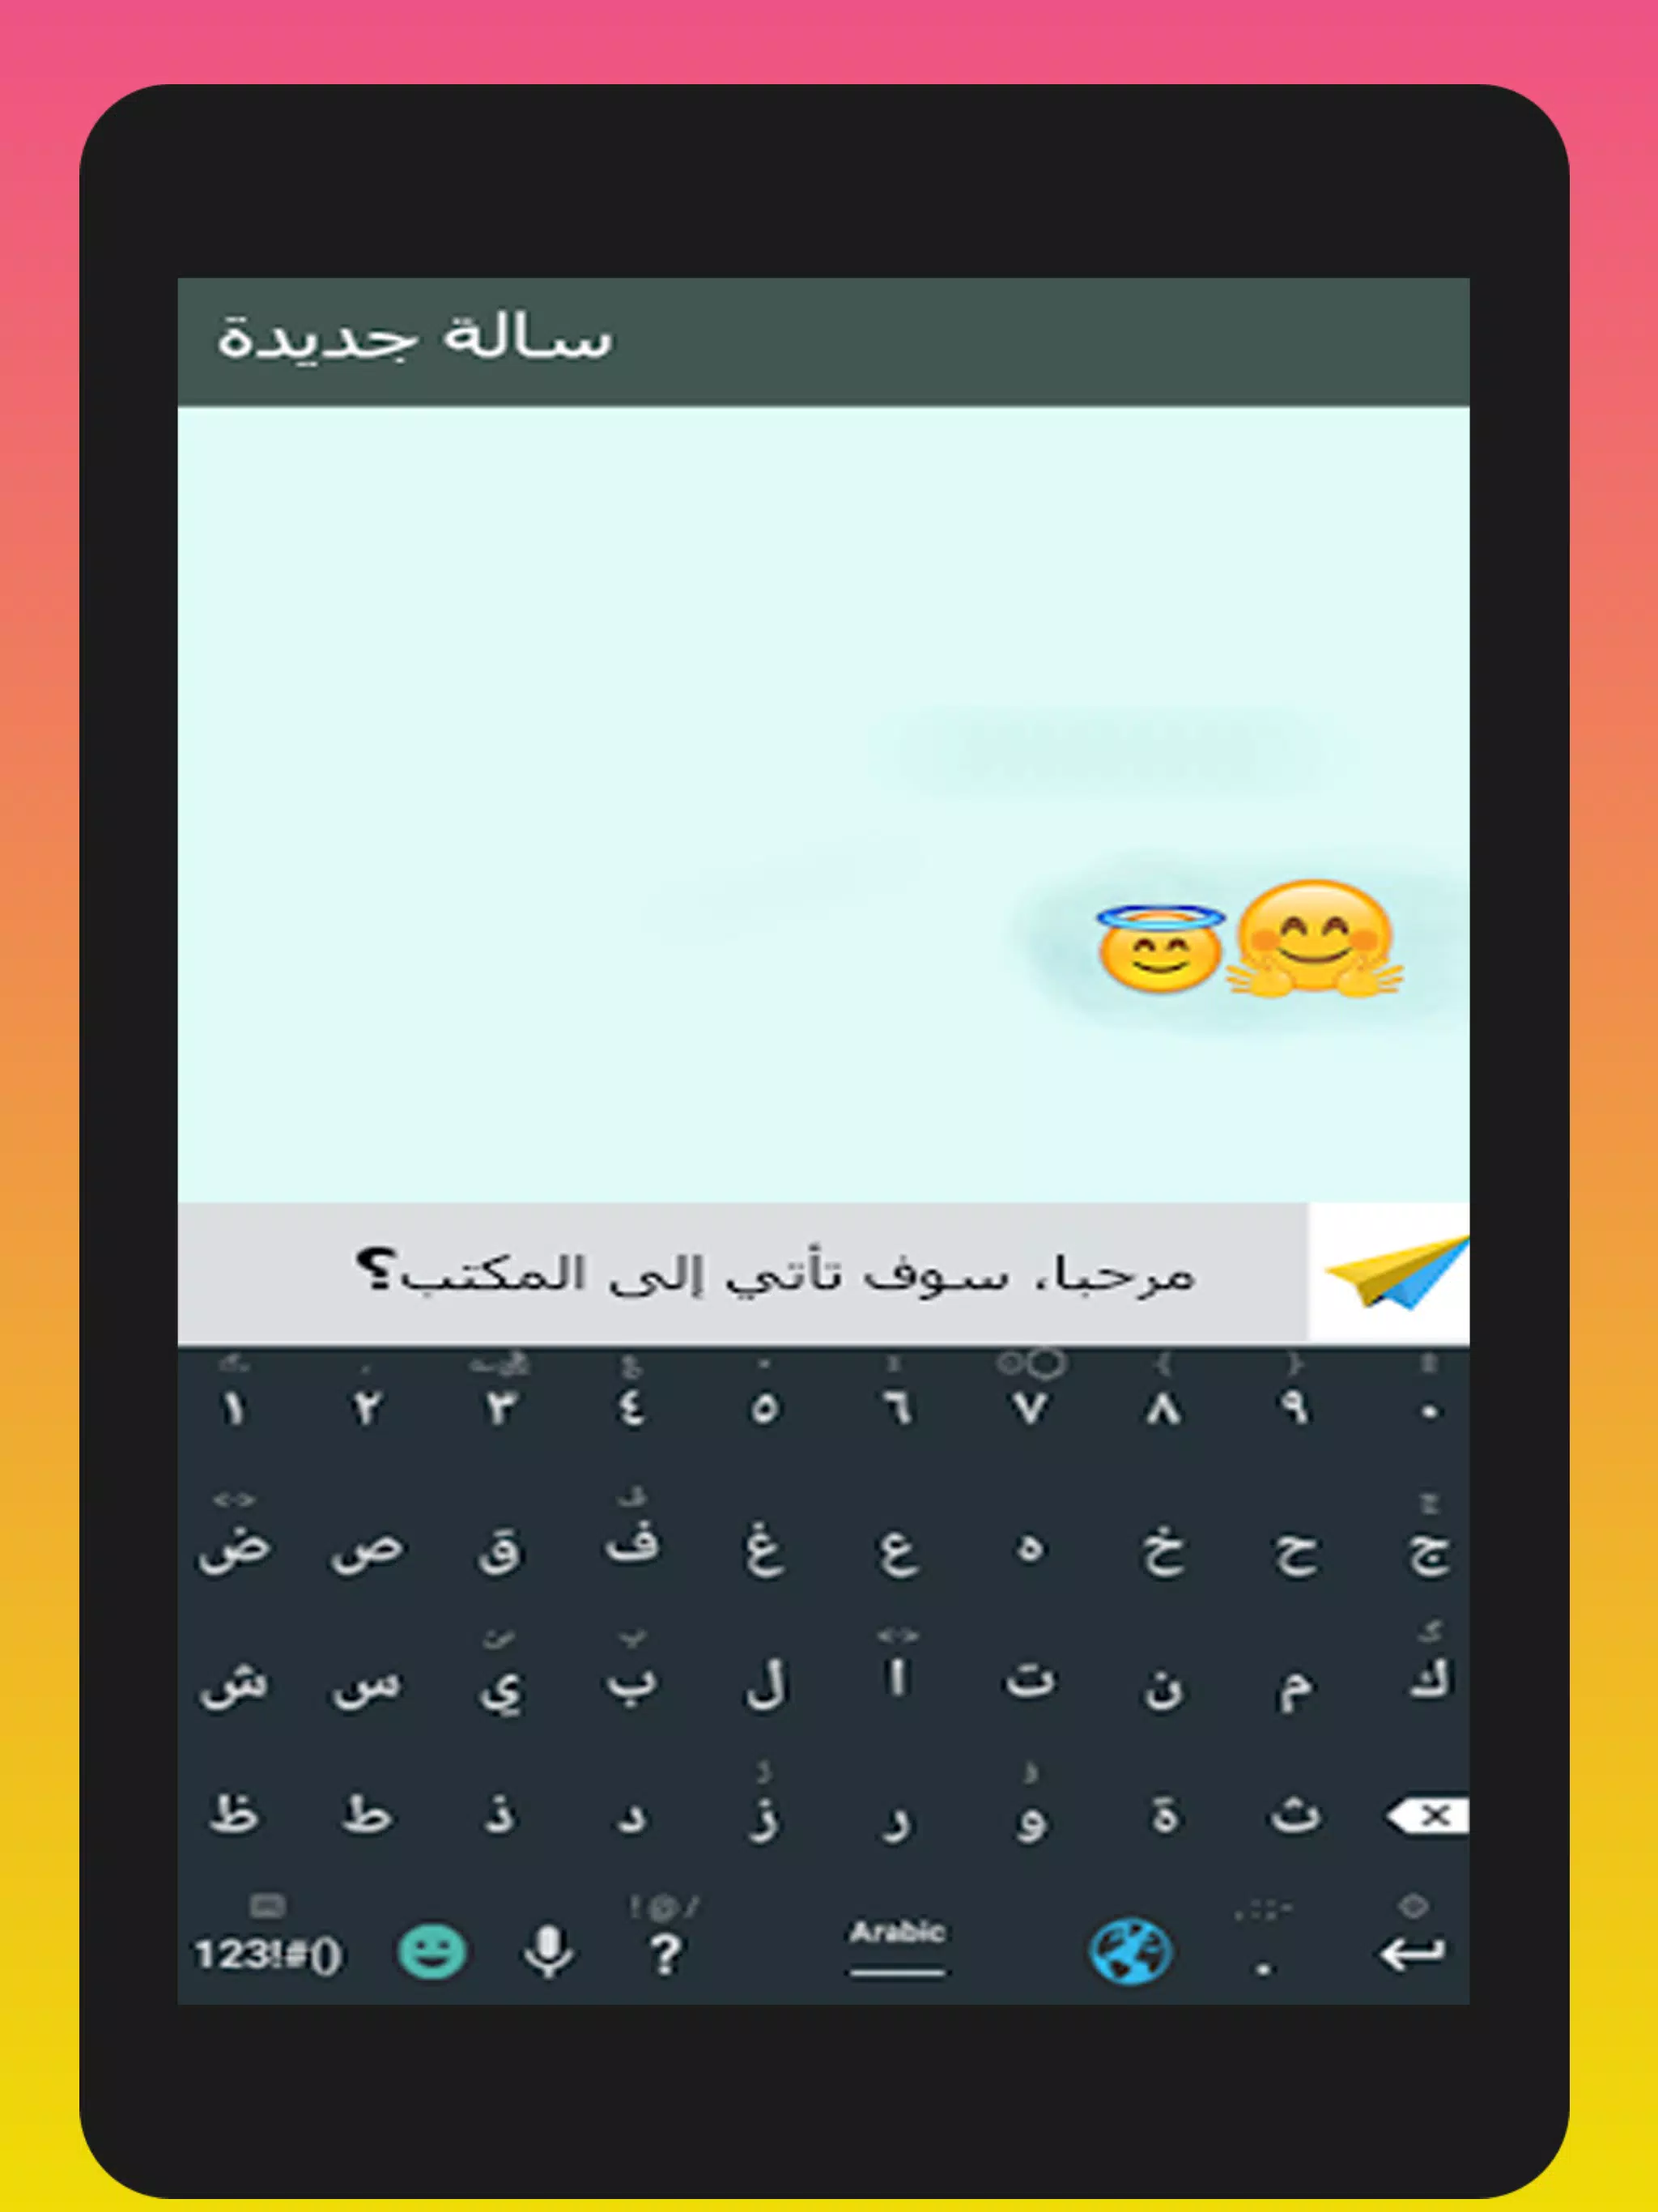 Clavier Arabic Francais English 2020 APK for Android Download